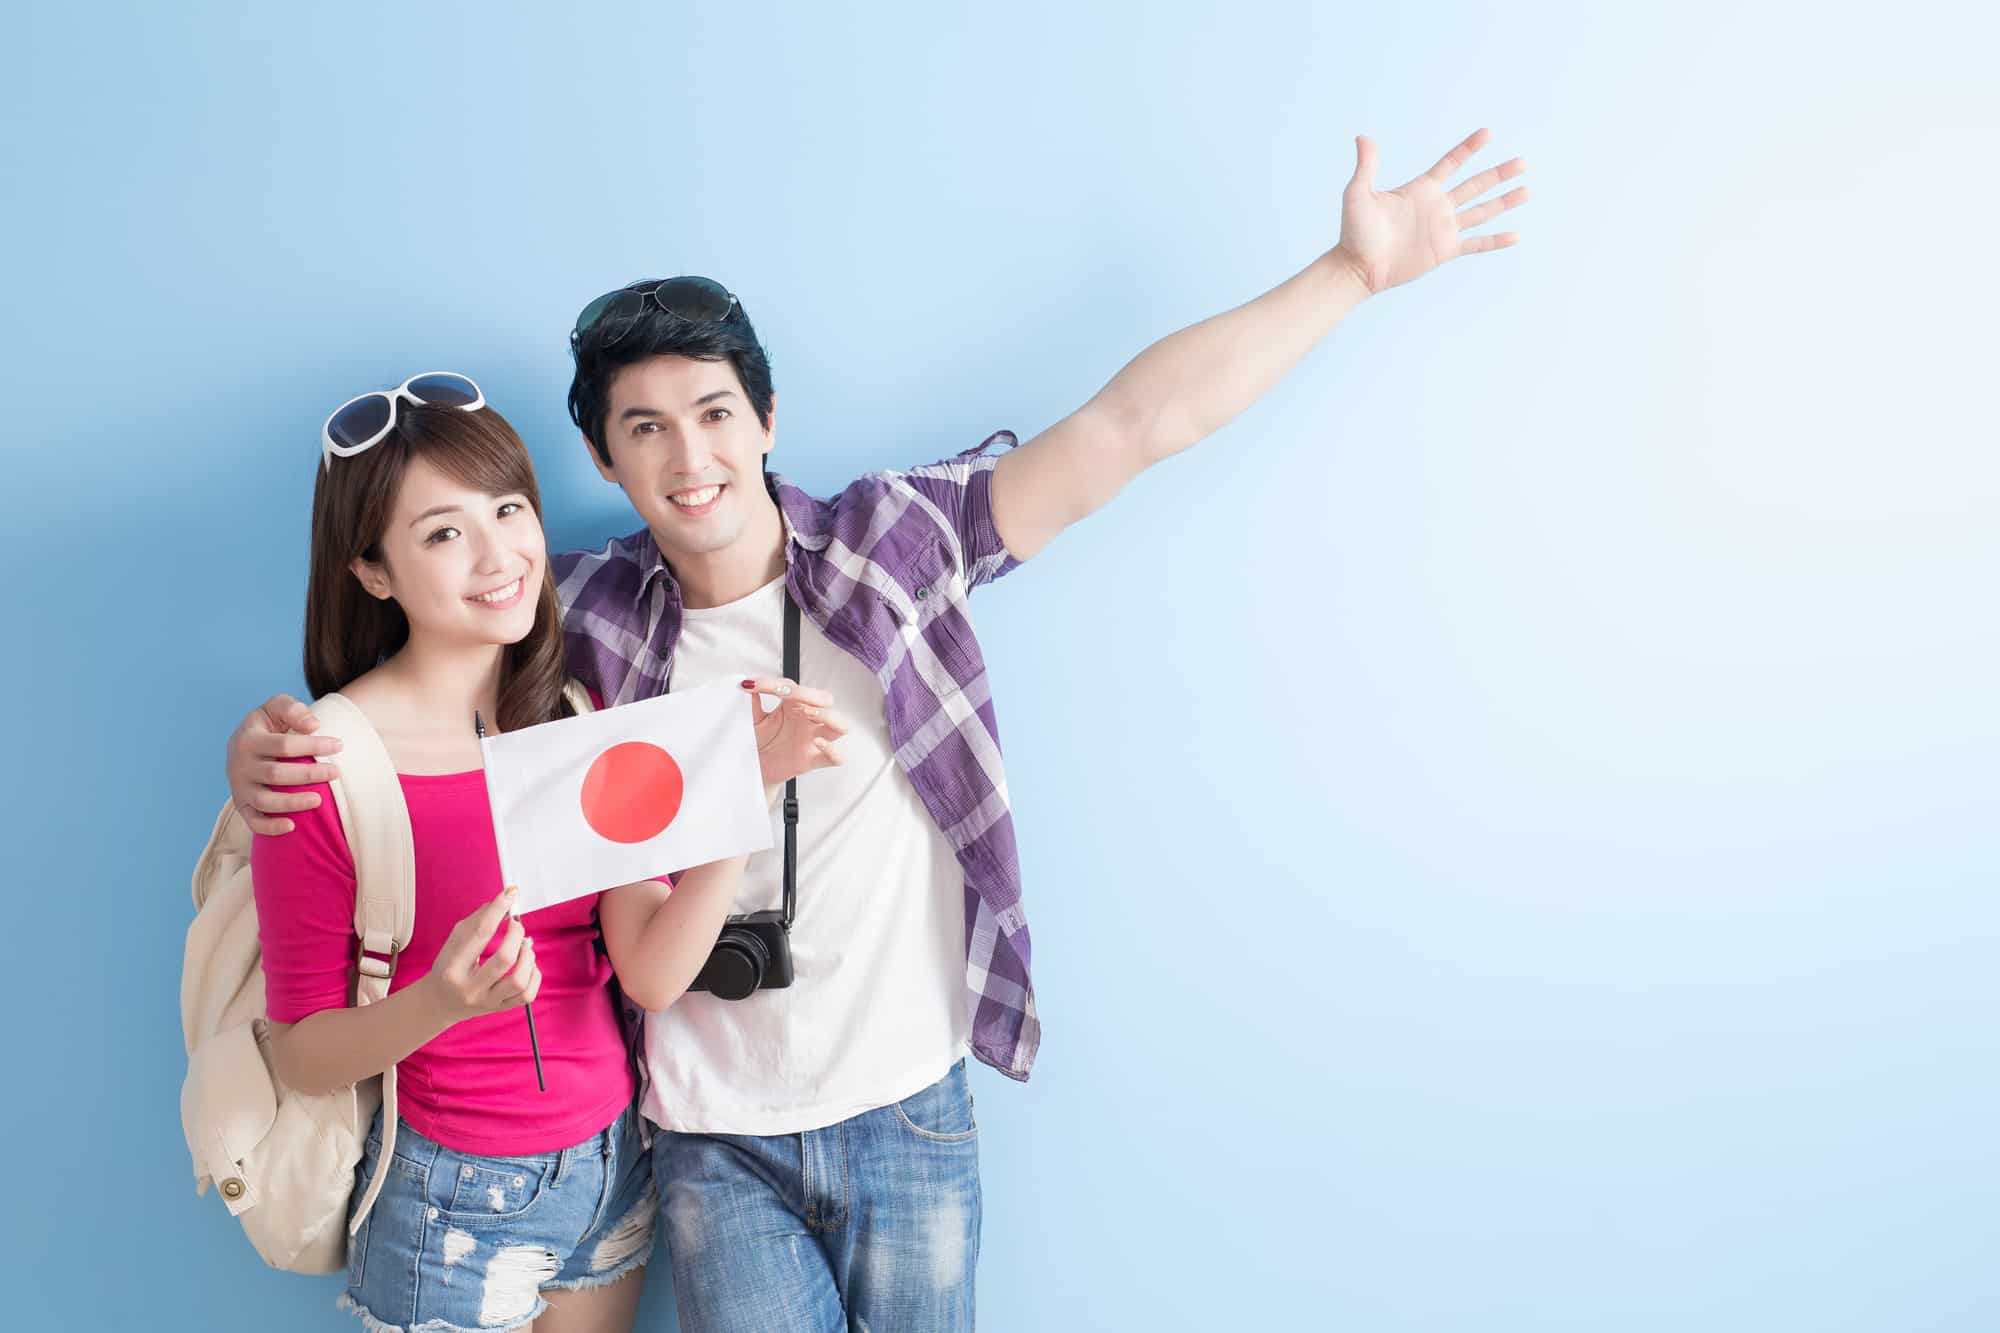 https://gardeniaweddingcinema.com/asian-dating-culture/dating-in-japanese-culture/